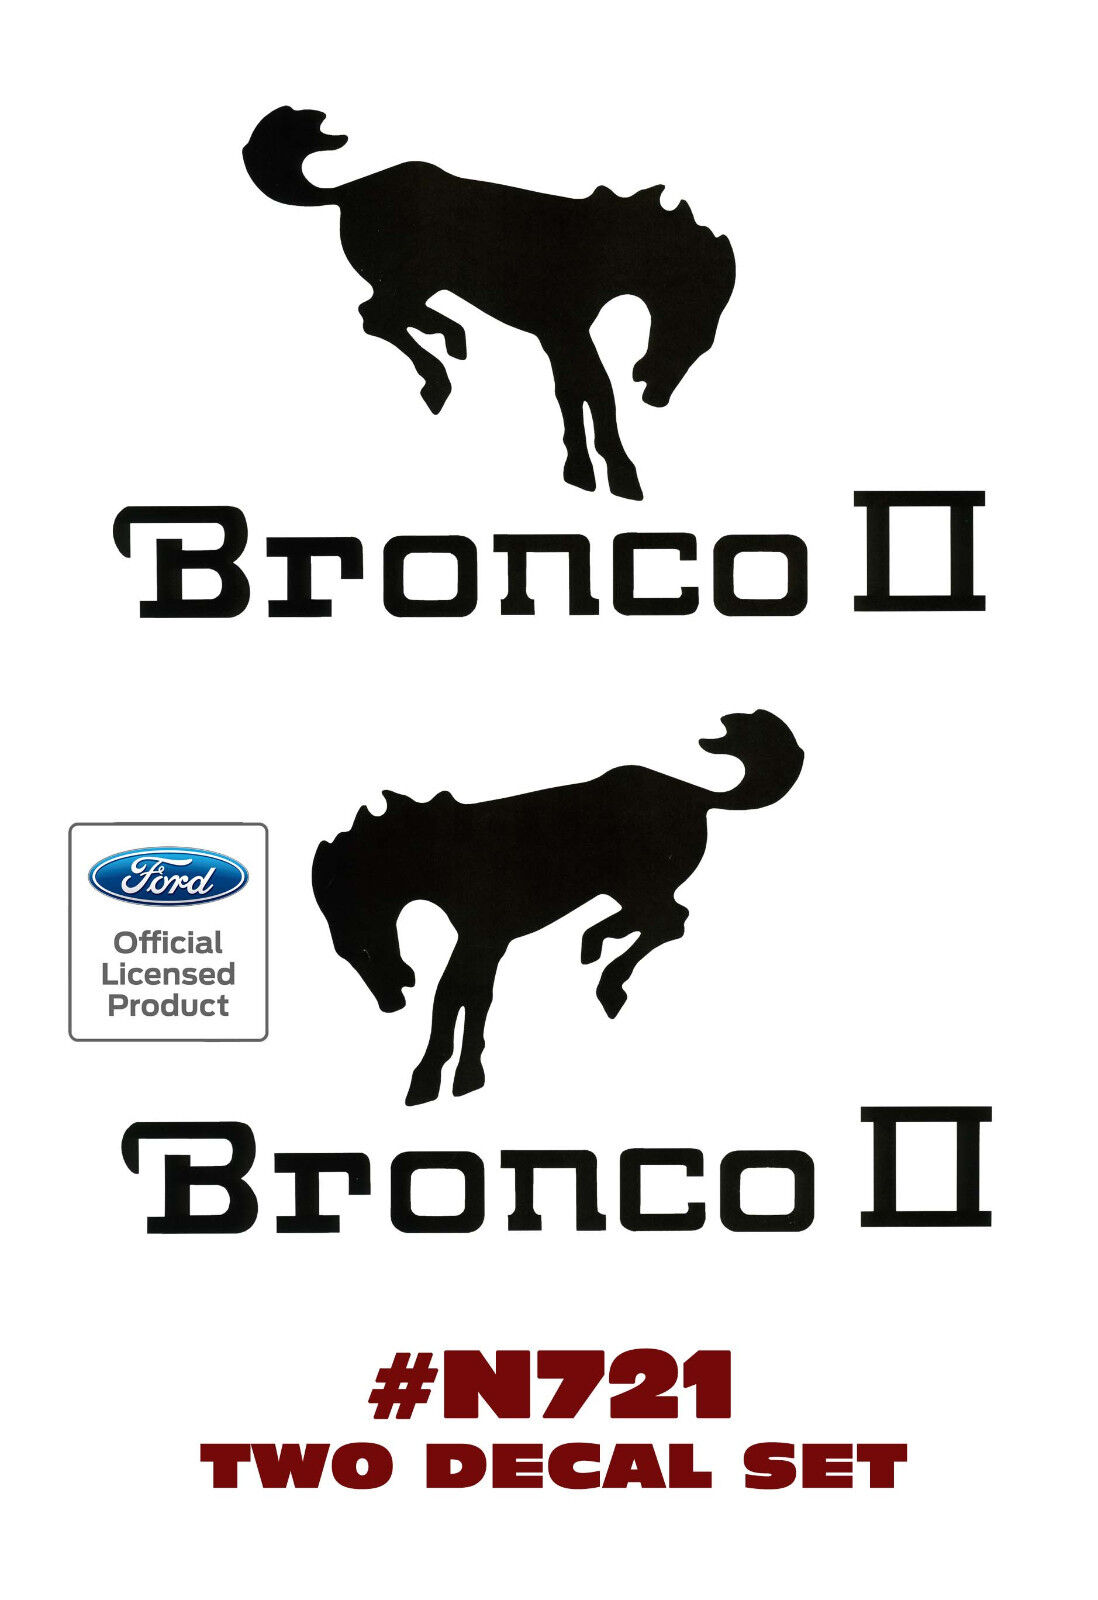 N721 FORD BRONCO - BRONCO II  with HORSE - DECAL SET - 4\